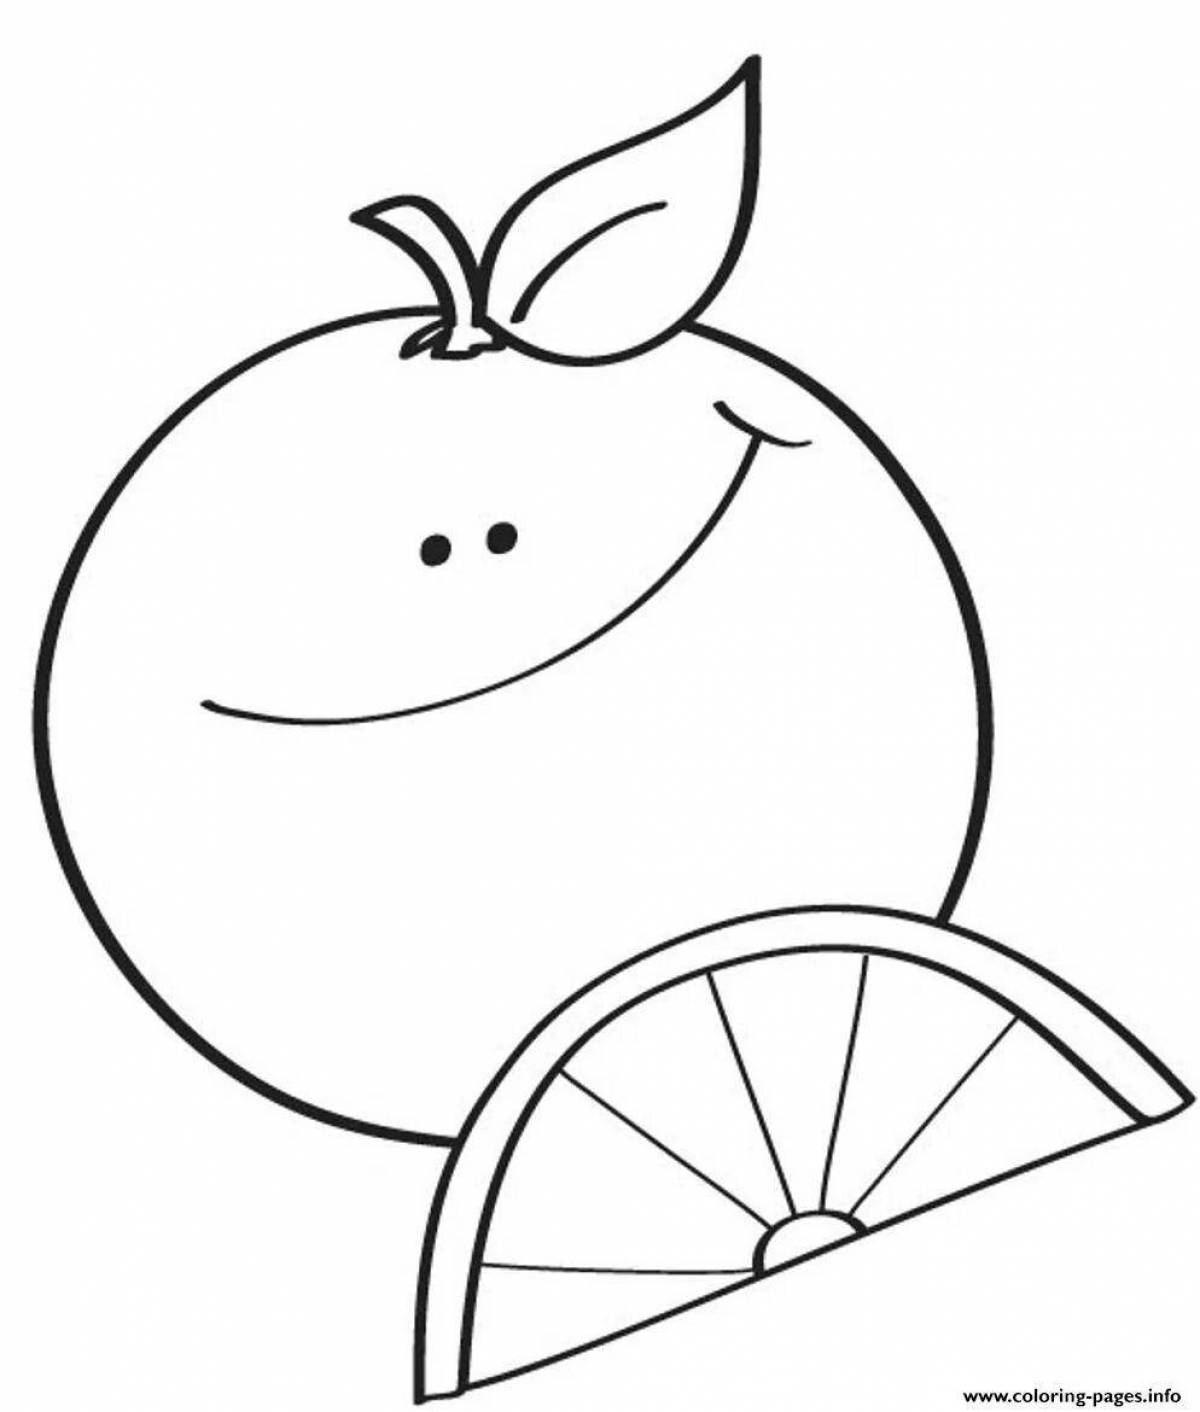 Fabulous tangerine coloring pages for kids